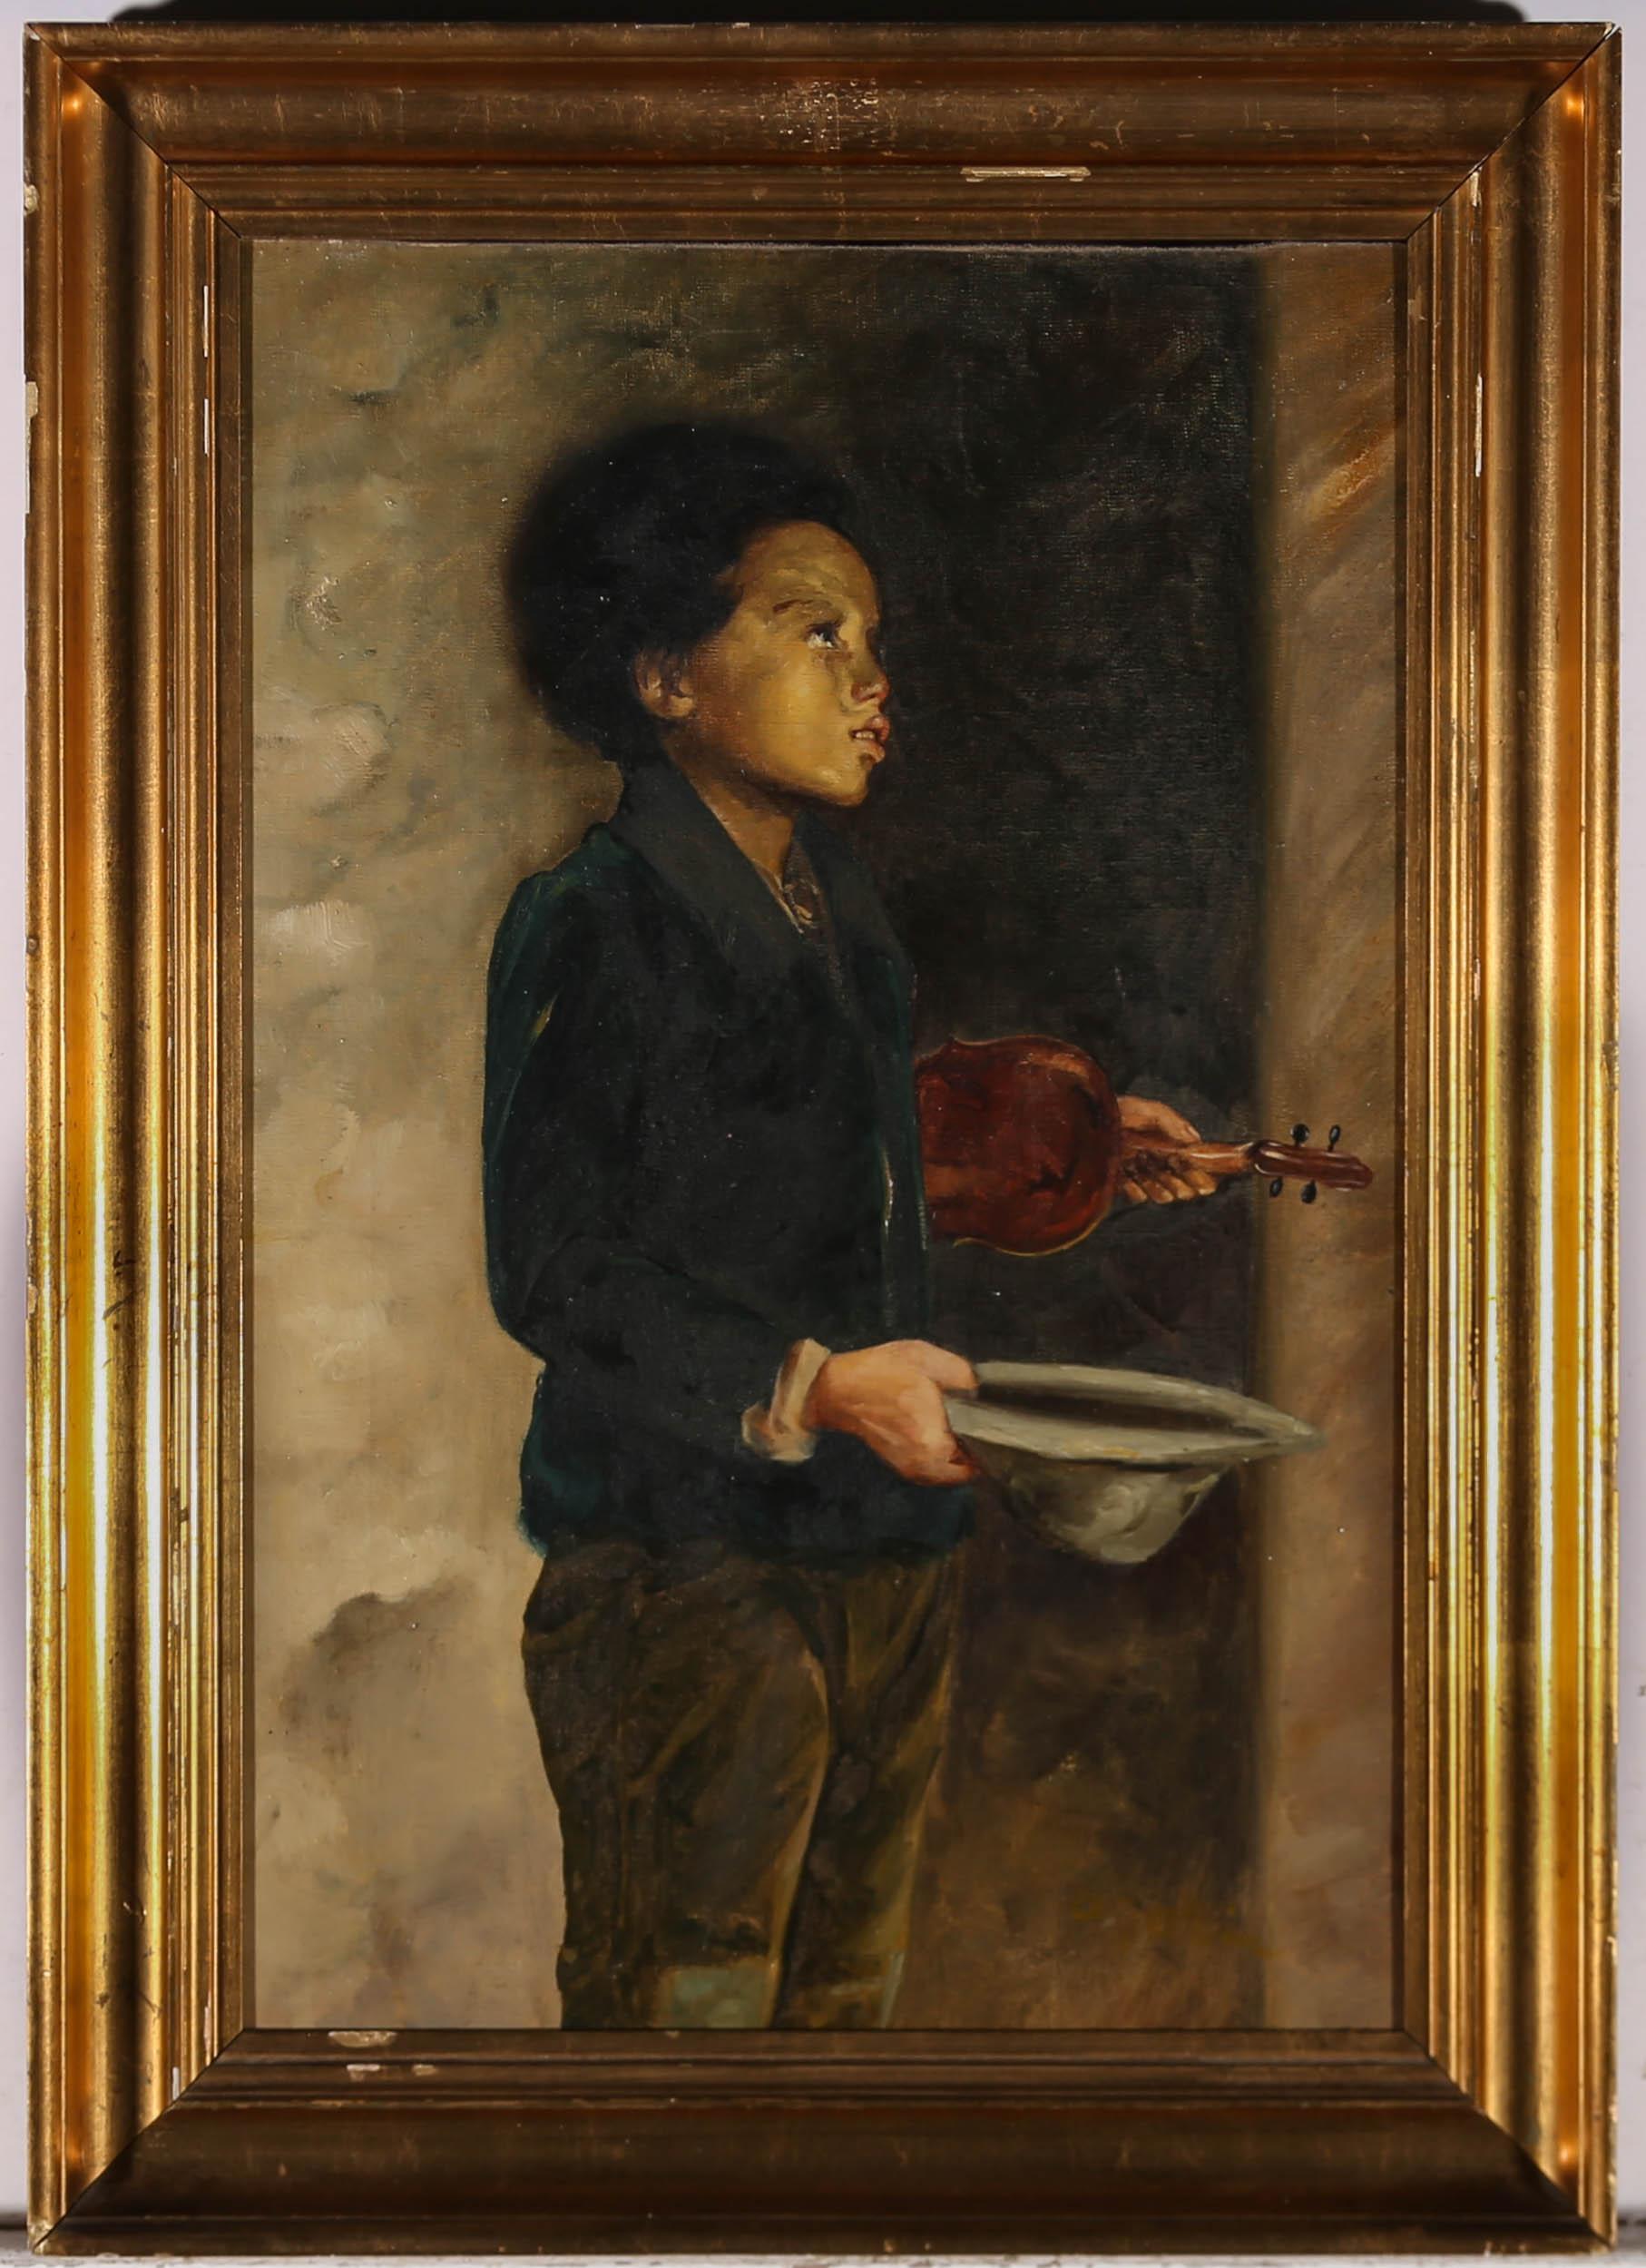 Unknown Portrait Painting - Framed American School Early 20th Century Oil - Young Busker